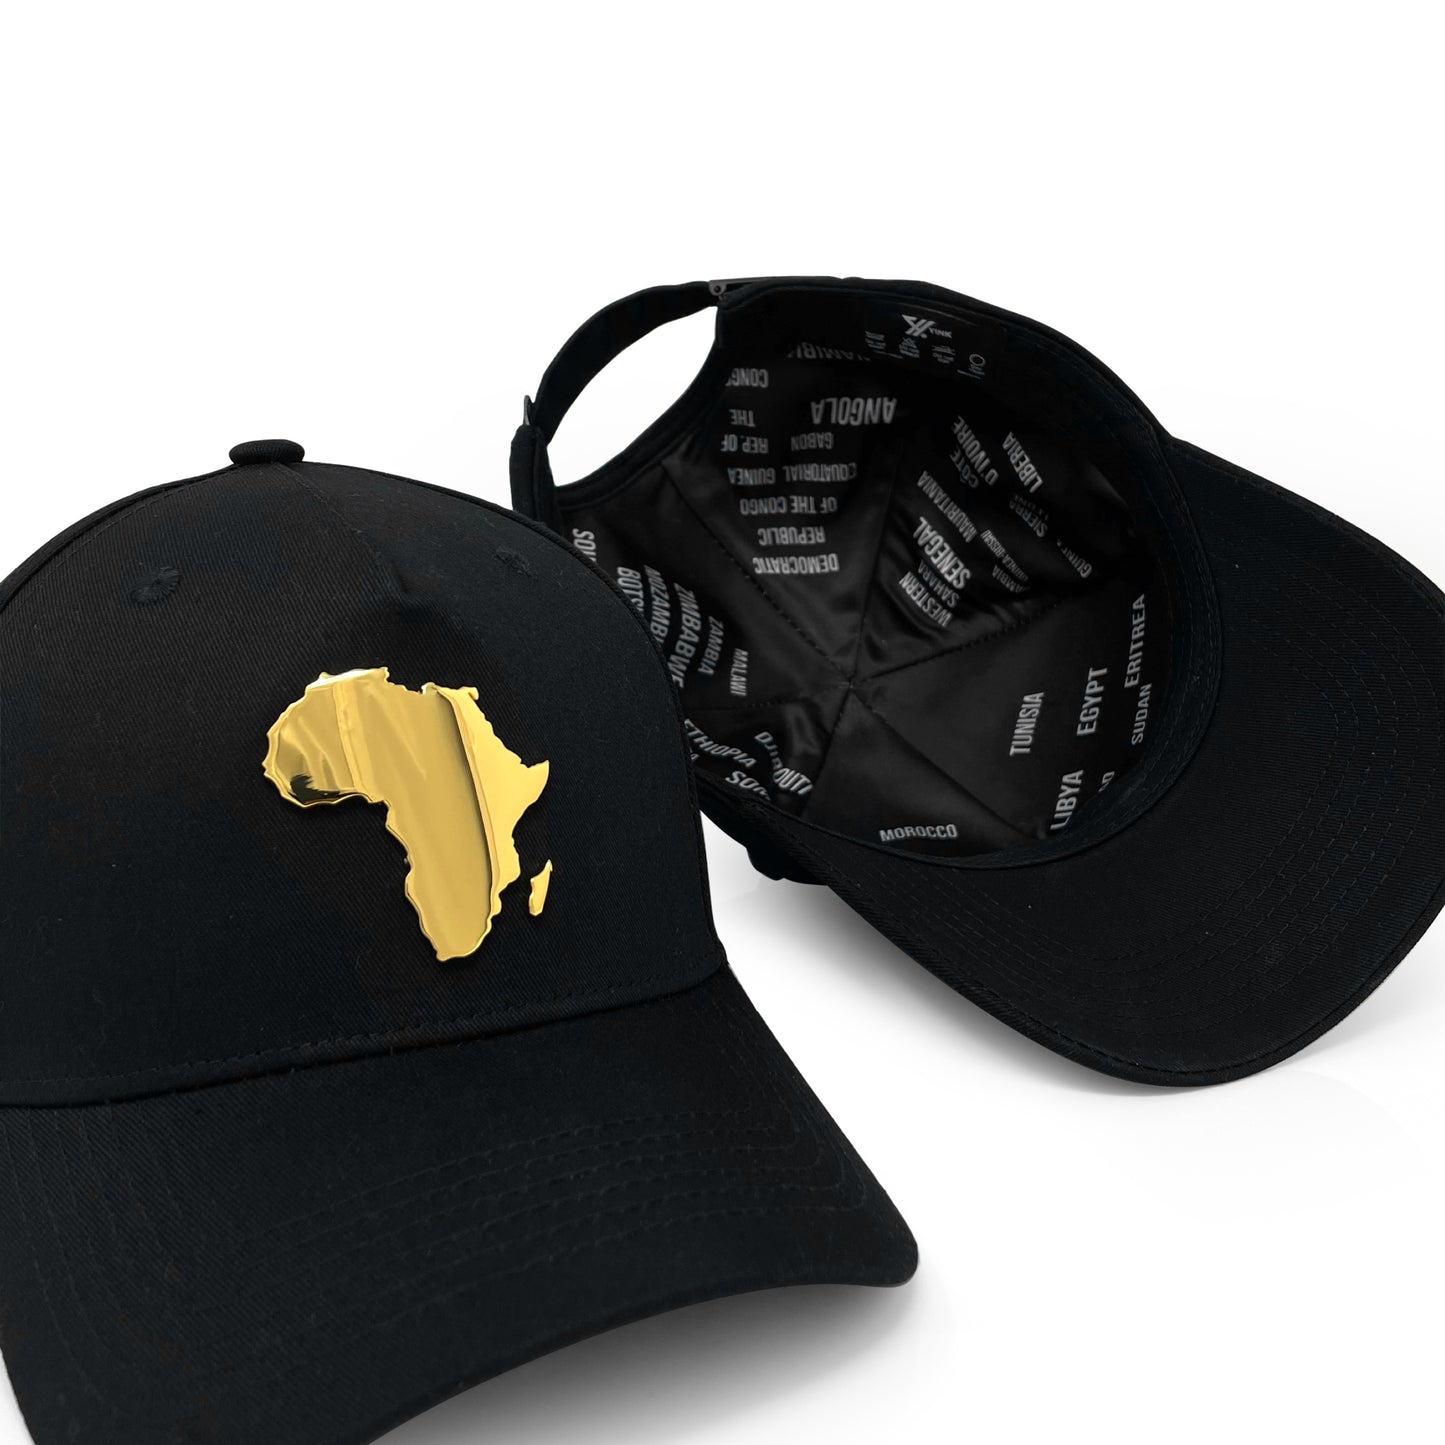 YINK CONTINENT GOLD BASEBALL HAT: Africa